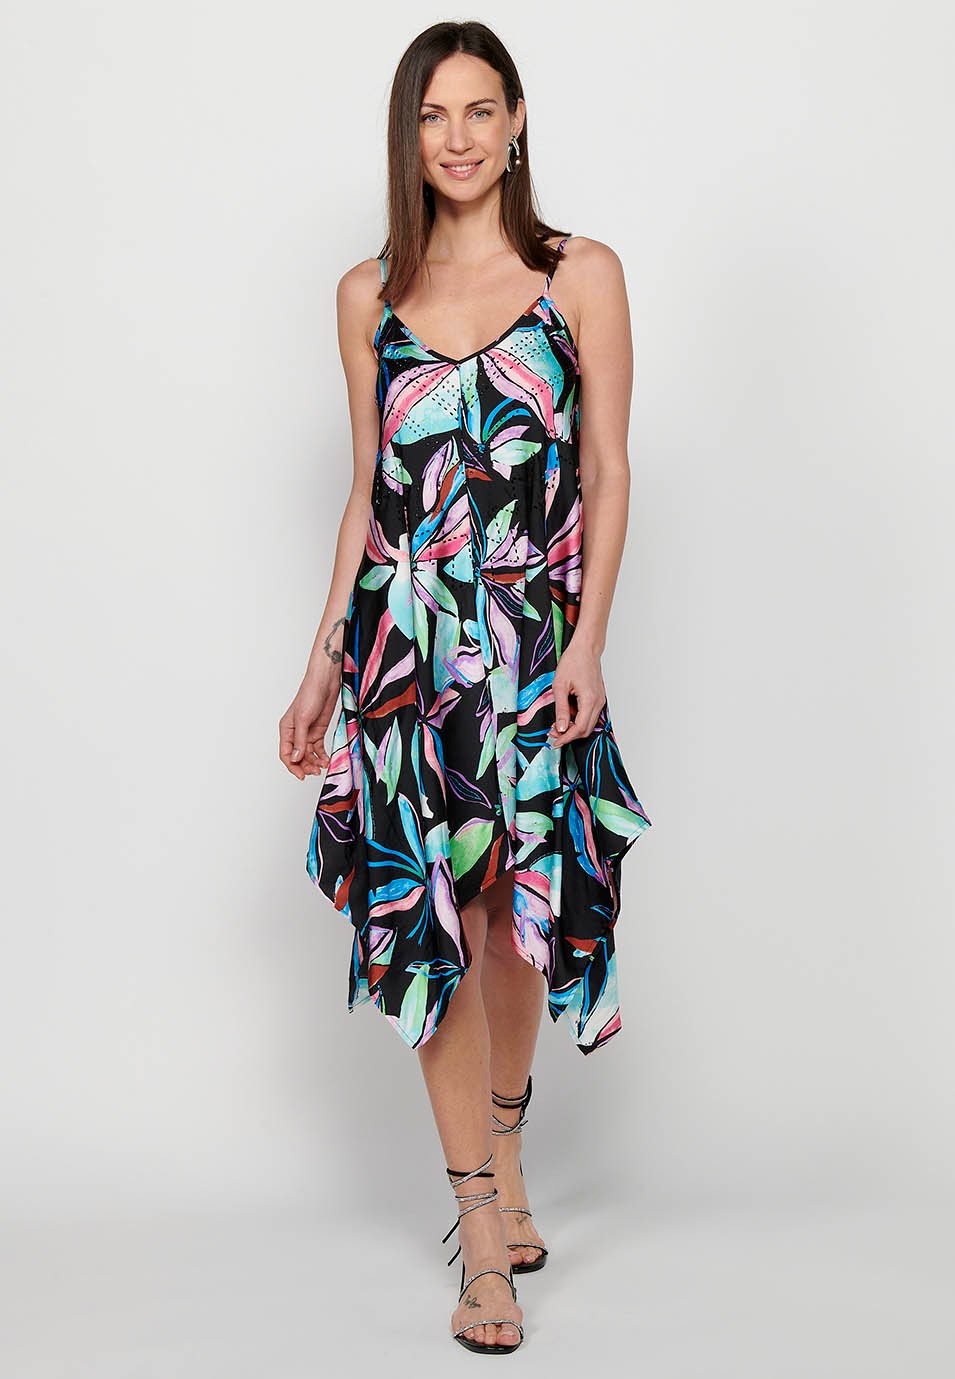 Midi dress with adjustable straps with sparkling neckline and long peaked finish with Multicolor floral print for Women